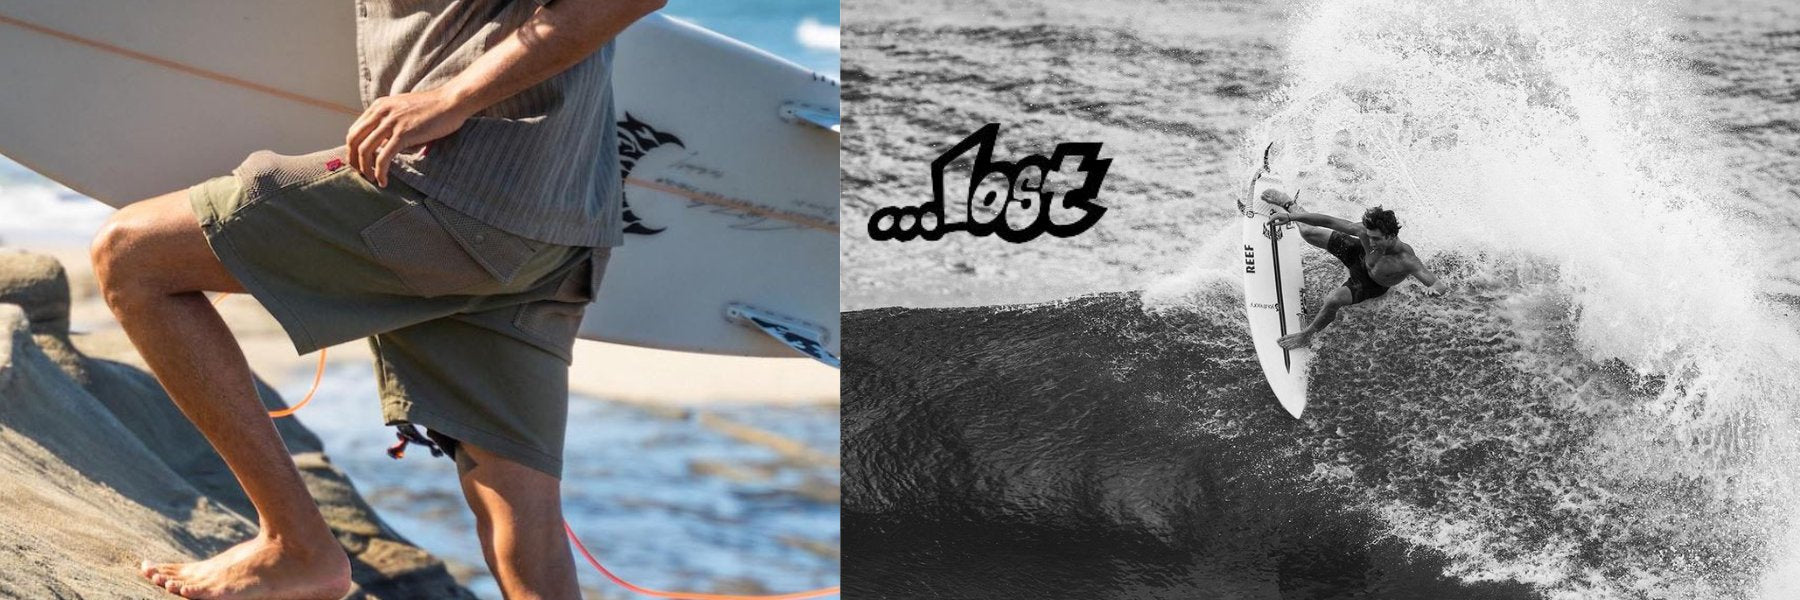 Shop Lost Clothing At Sun Diego Boardshop